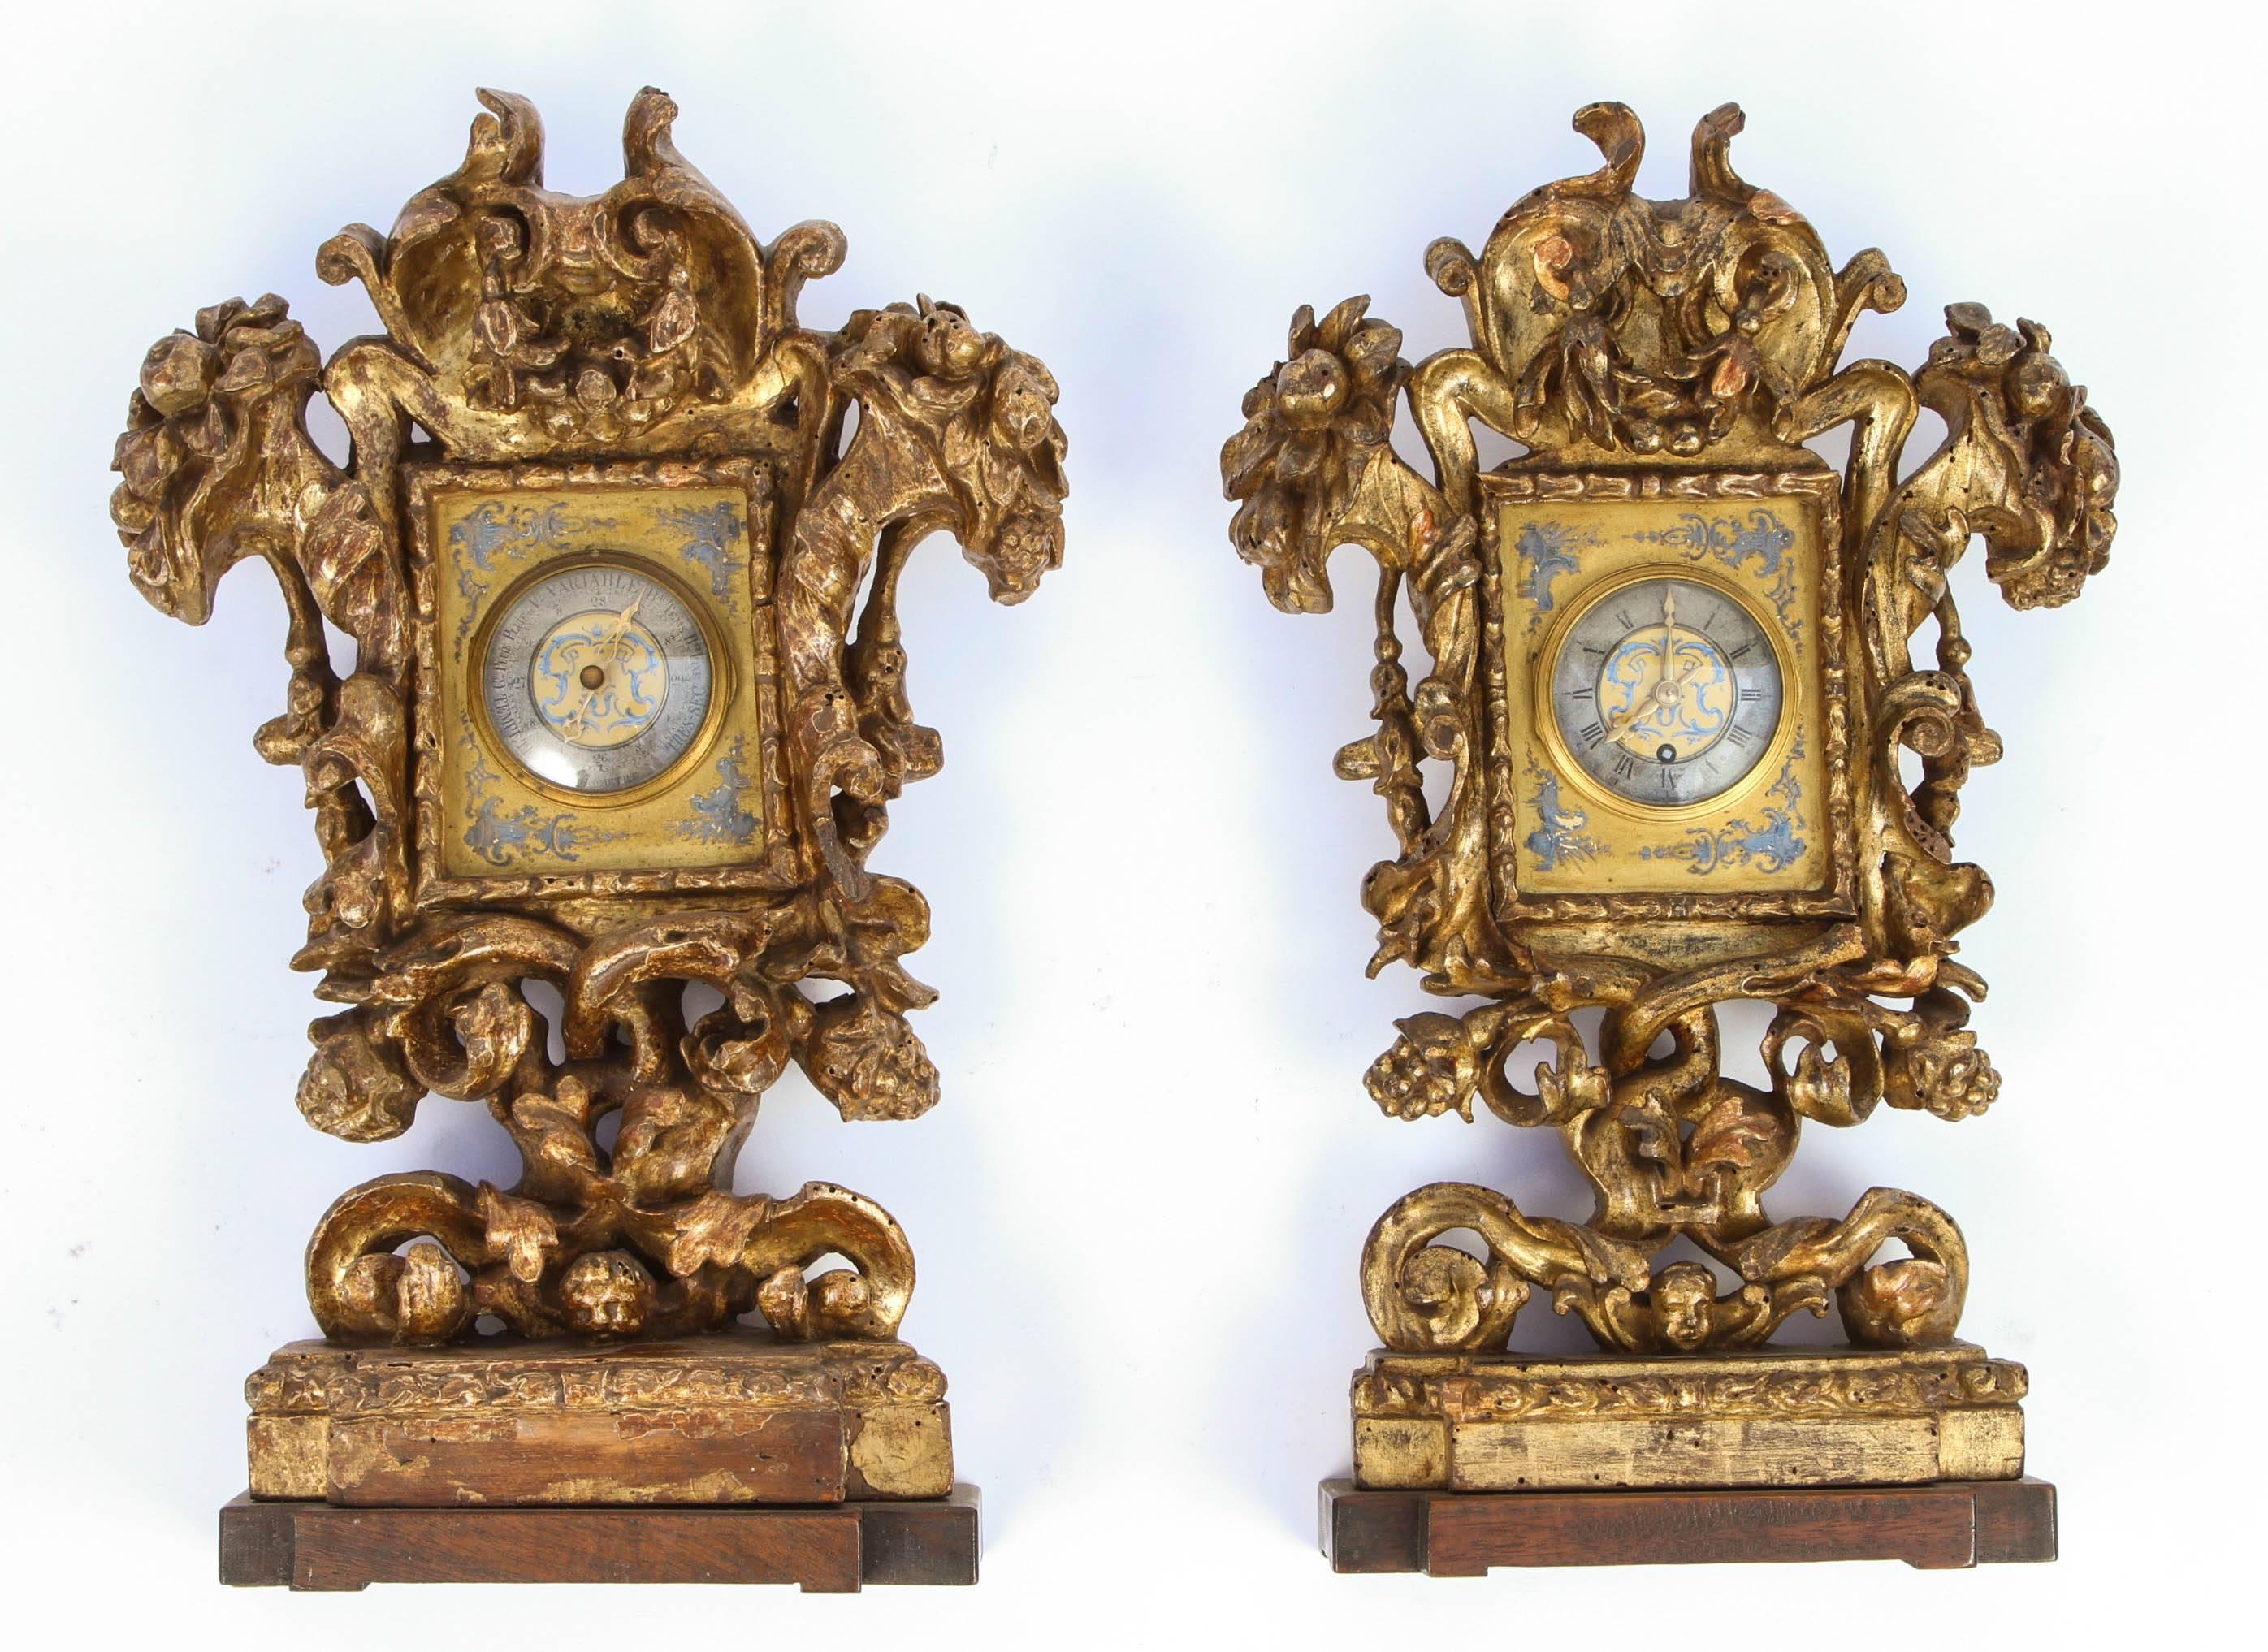 Pair of 18th century Italian carved wood fragments with clock and barometer.